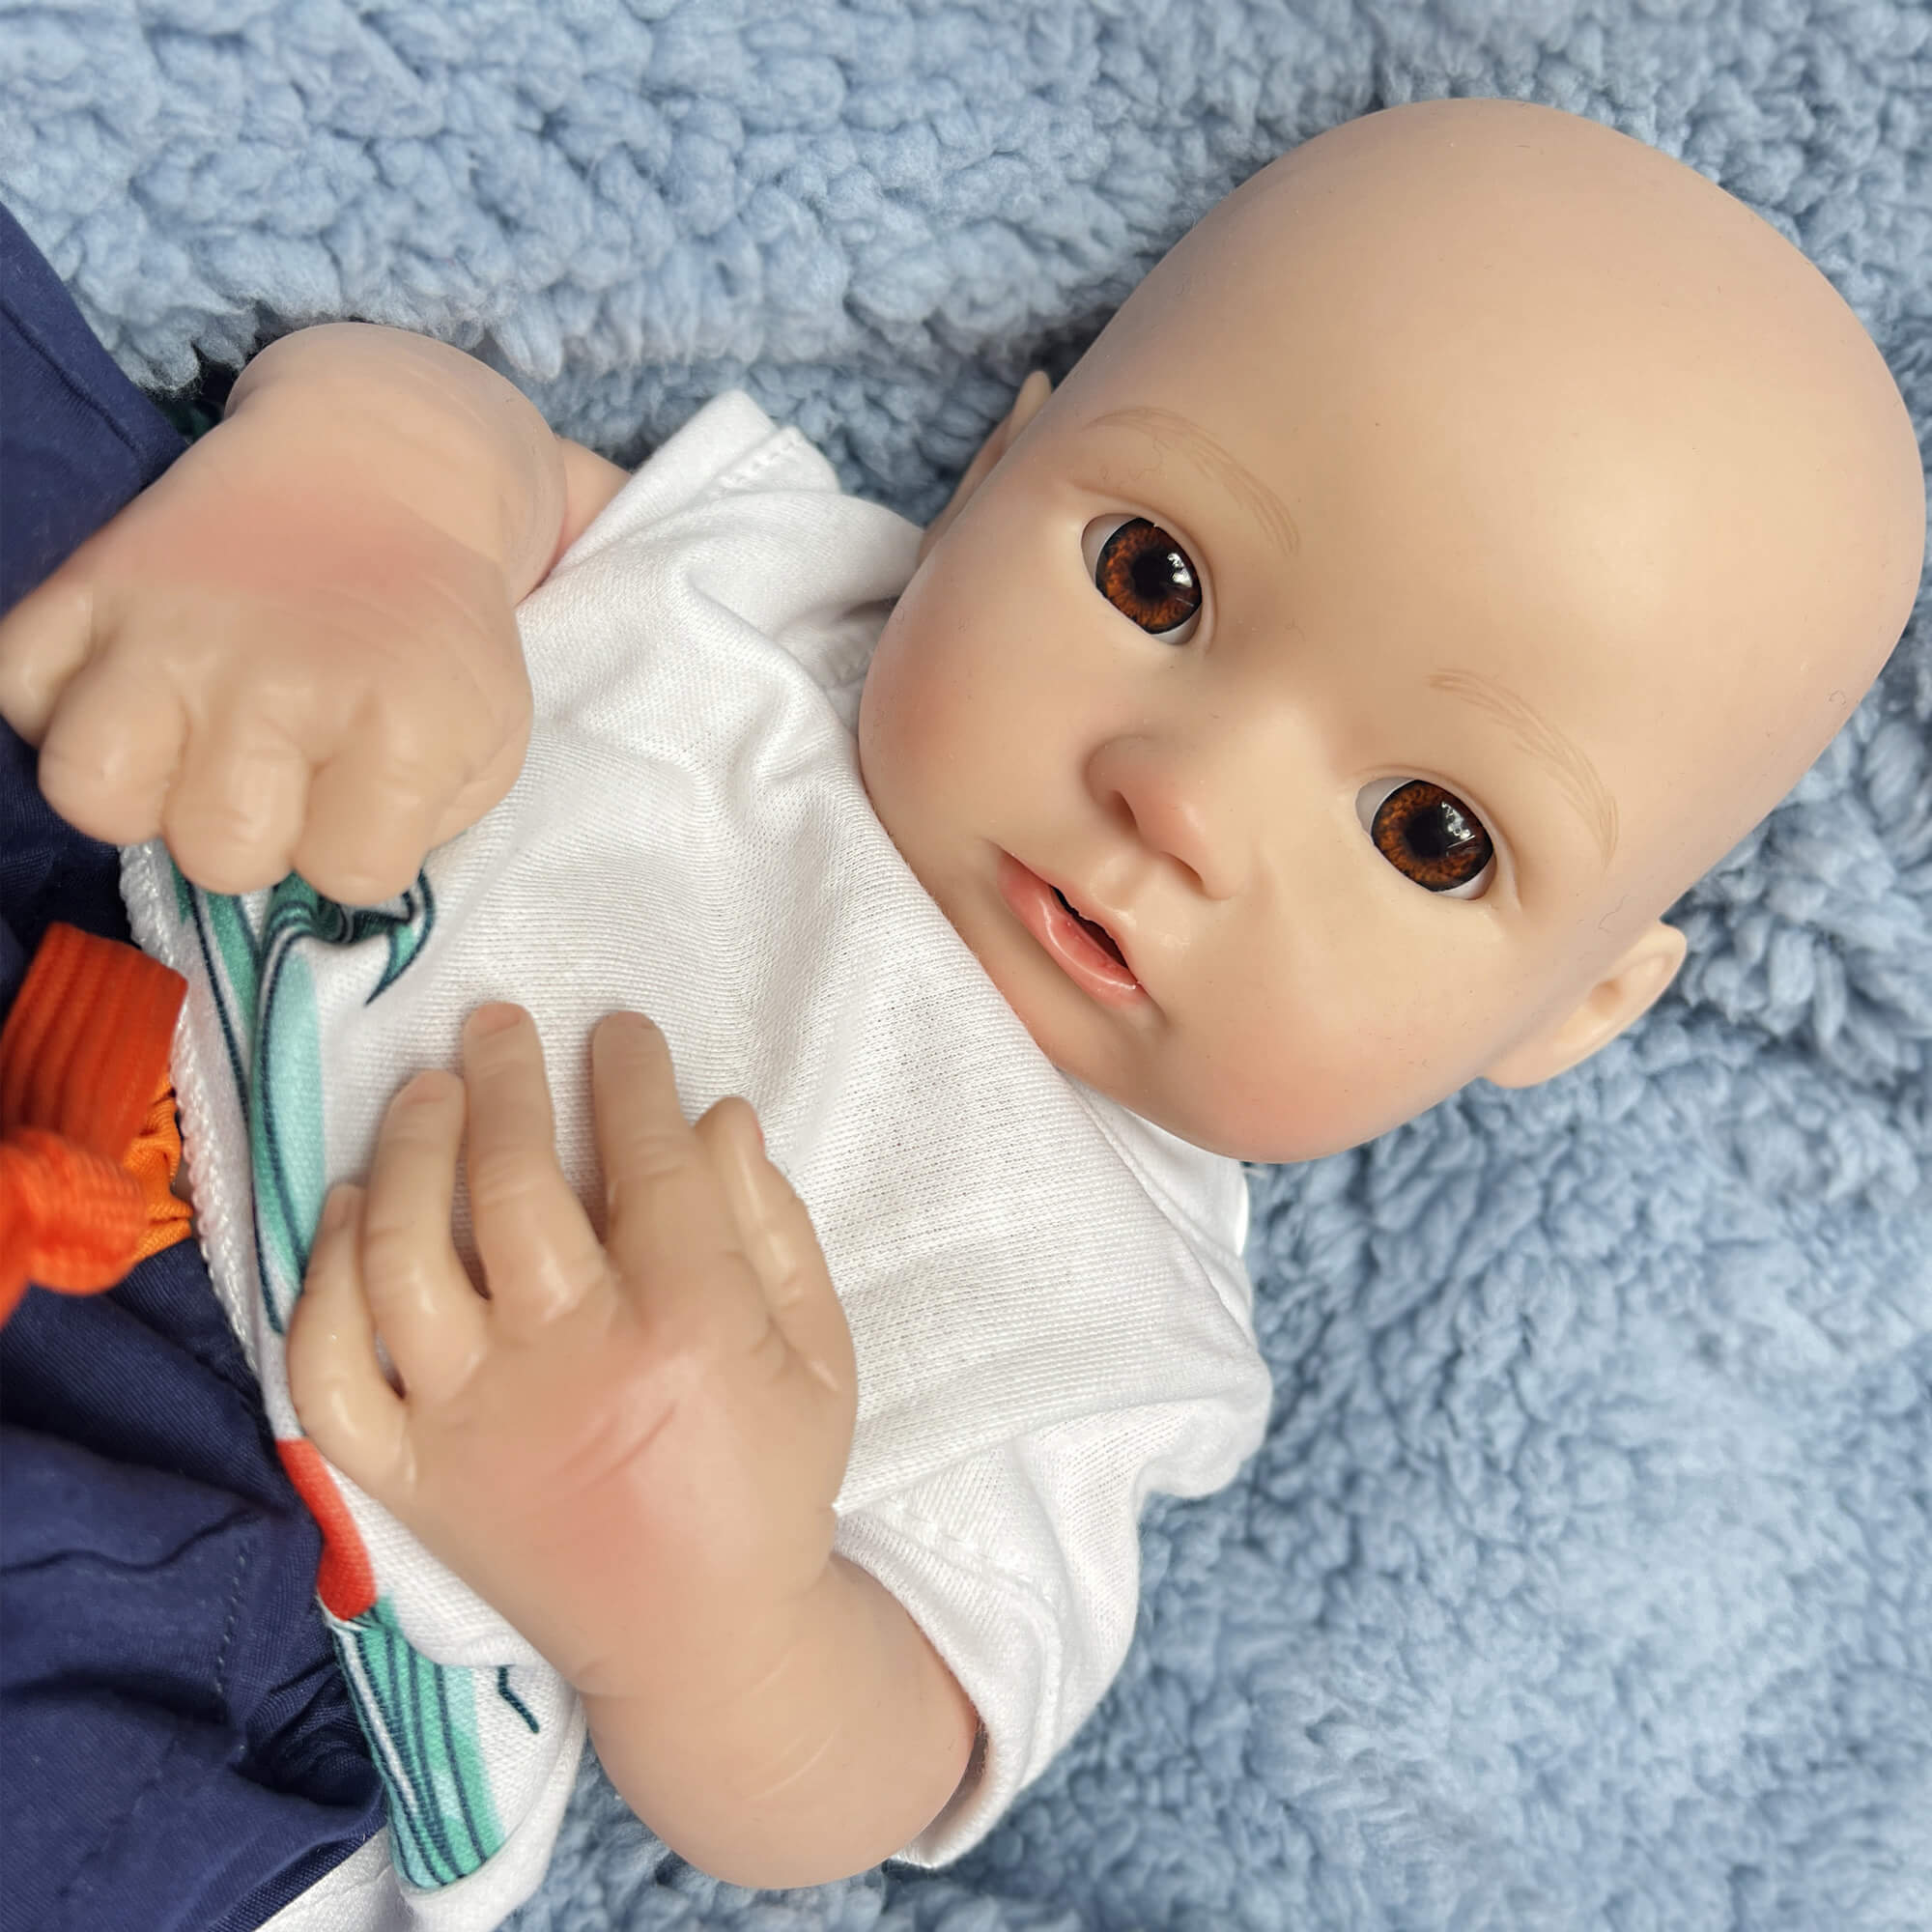 13 Inch Full Body Silicone Baby Dolls That Look Real Not Vinyl Dolls Lifelike Realistic Silicone Baby Dolls for Kids Children Birthday Christmas Toys Present Gifts(Boy)